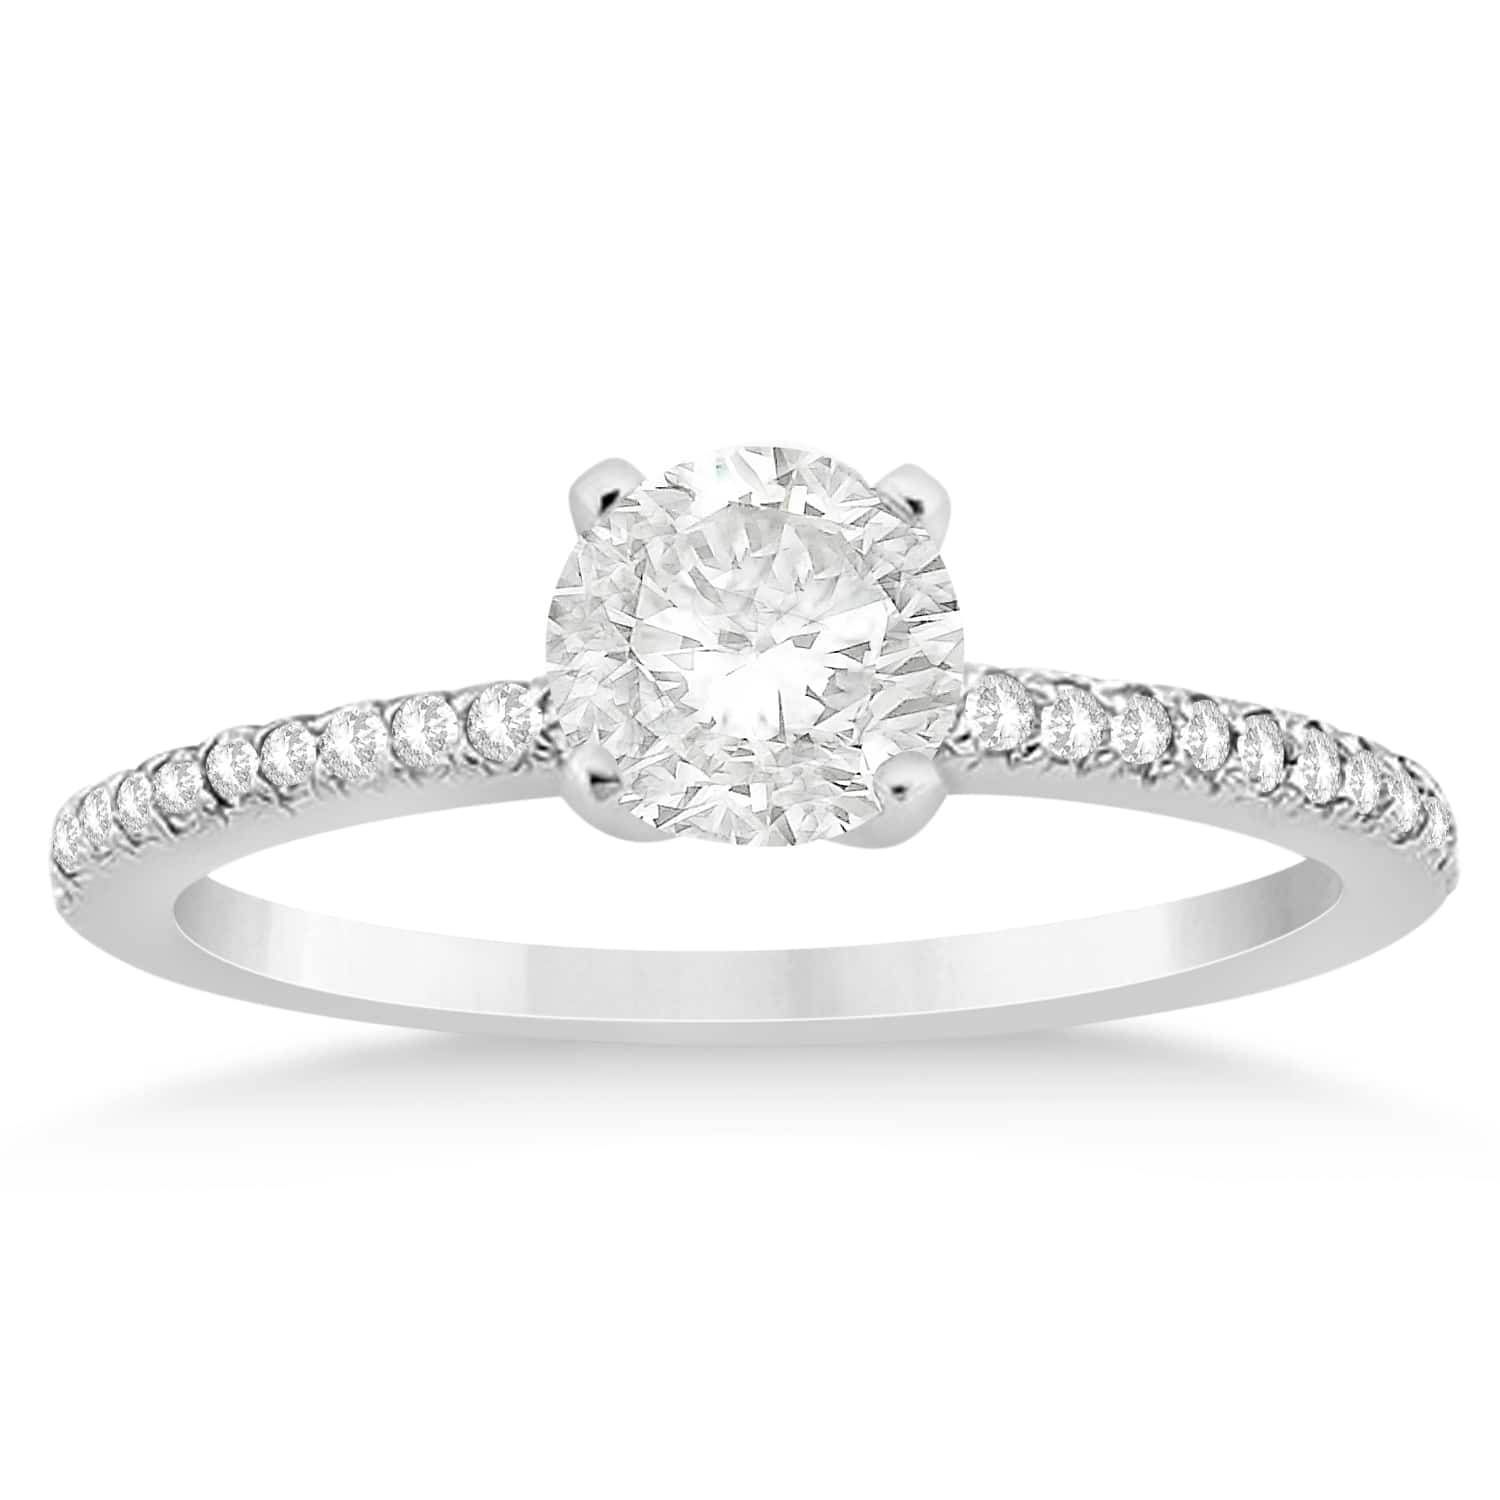 Diamond Accented Engagement Ring Setting 18k White Gold 0.18ct